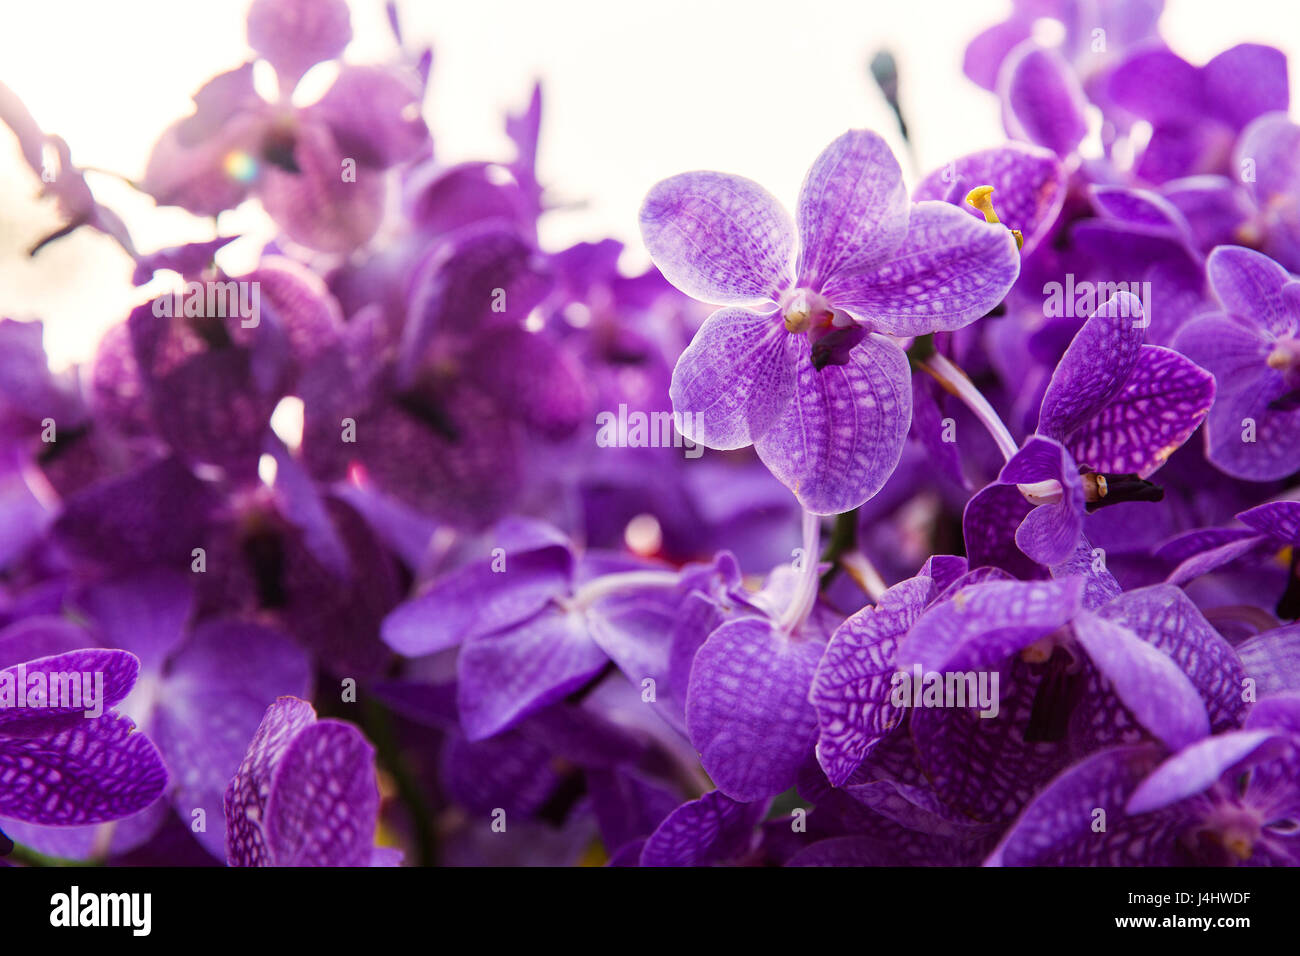 violet or purple ascocenda orchid flowers Stock Photo